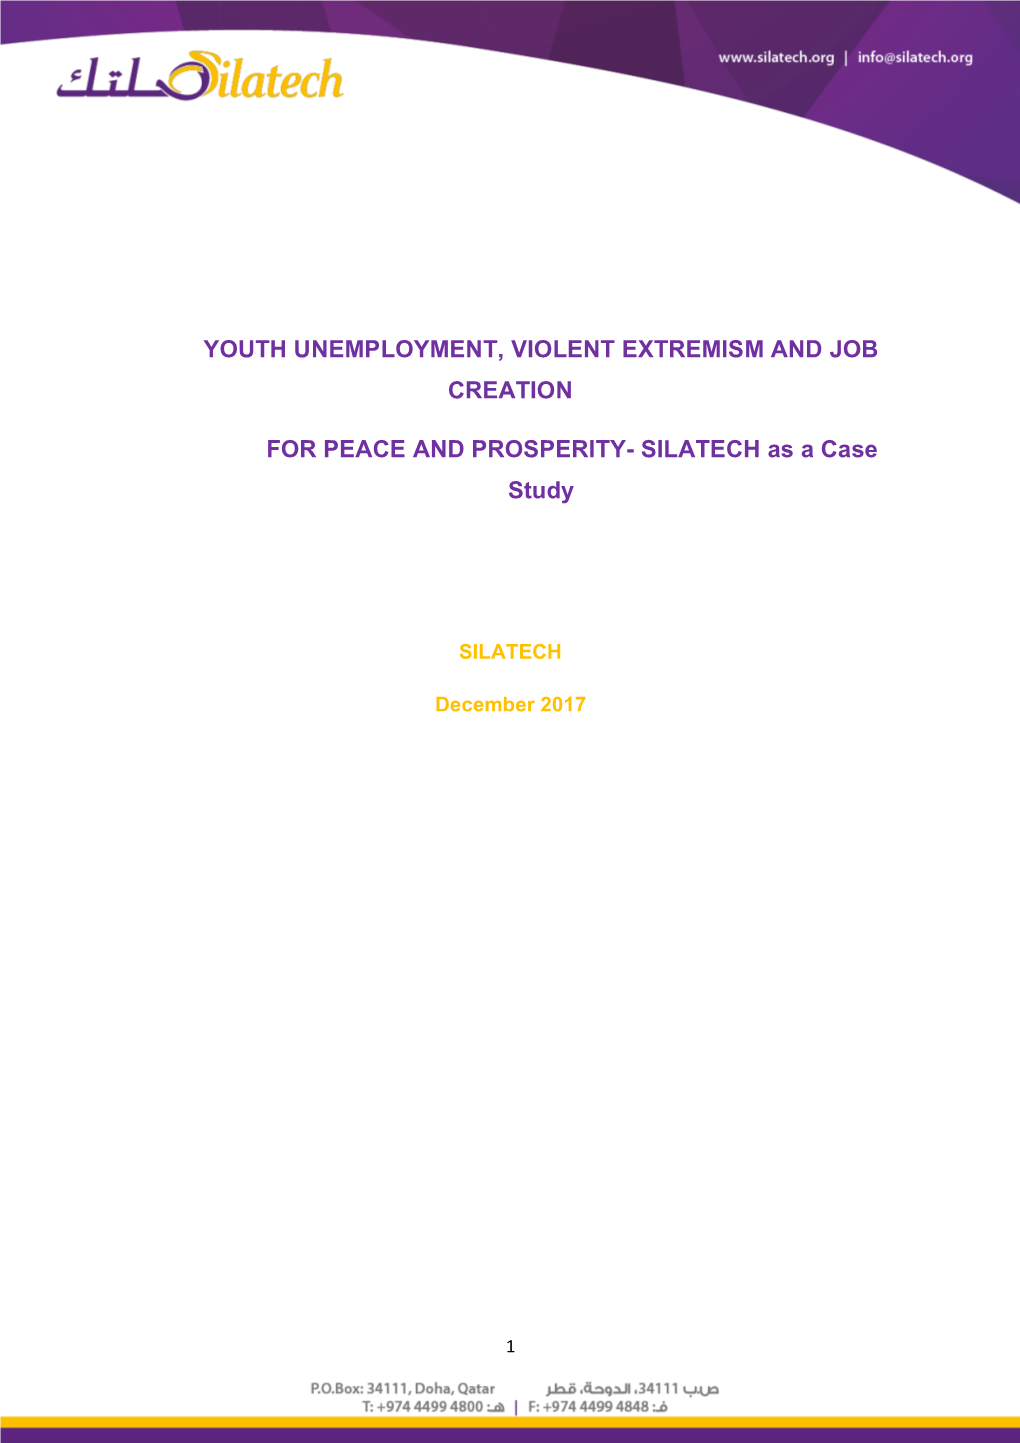 Youth Unemployment, Violent Extremism and Job Creation